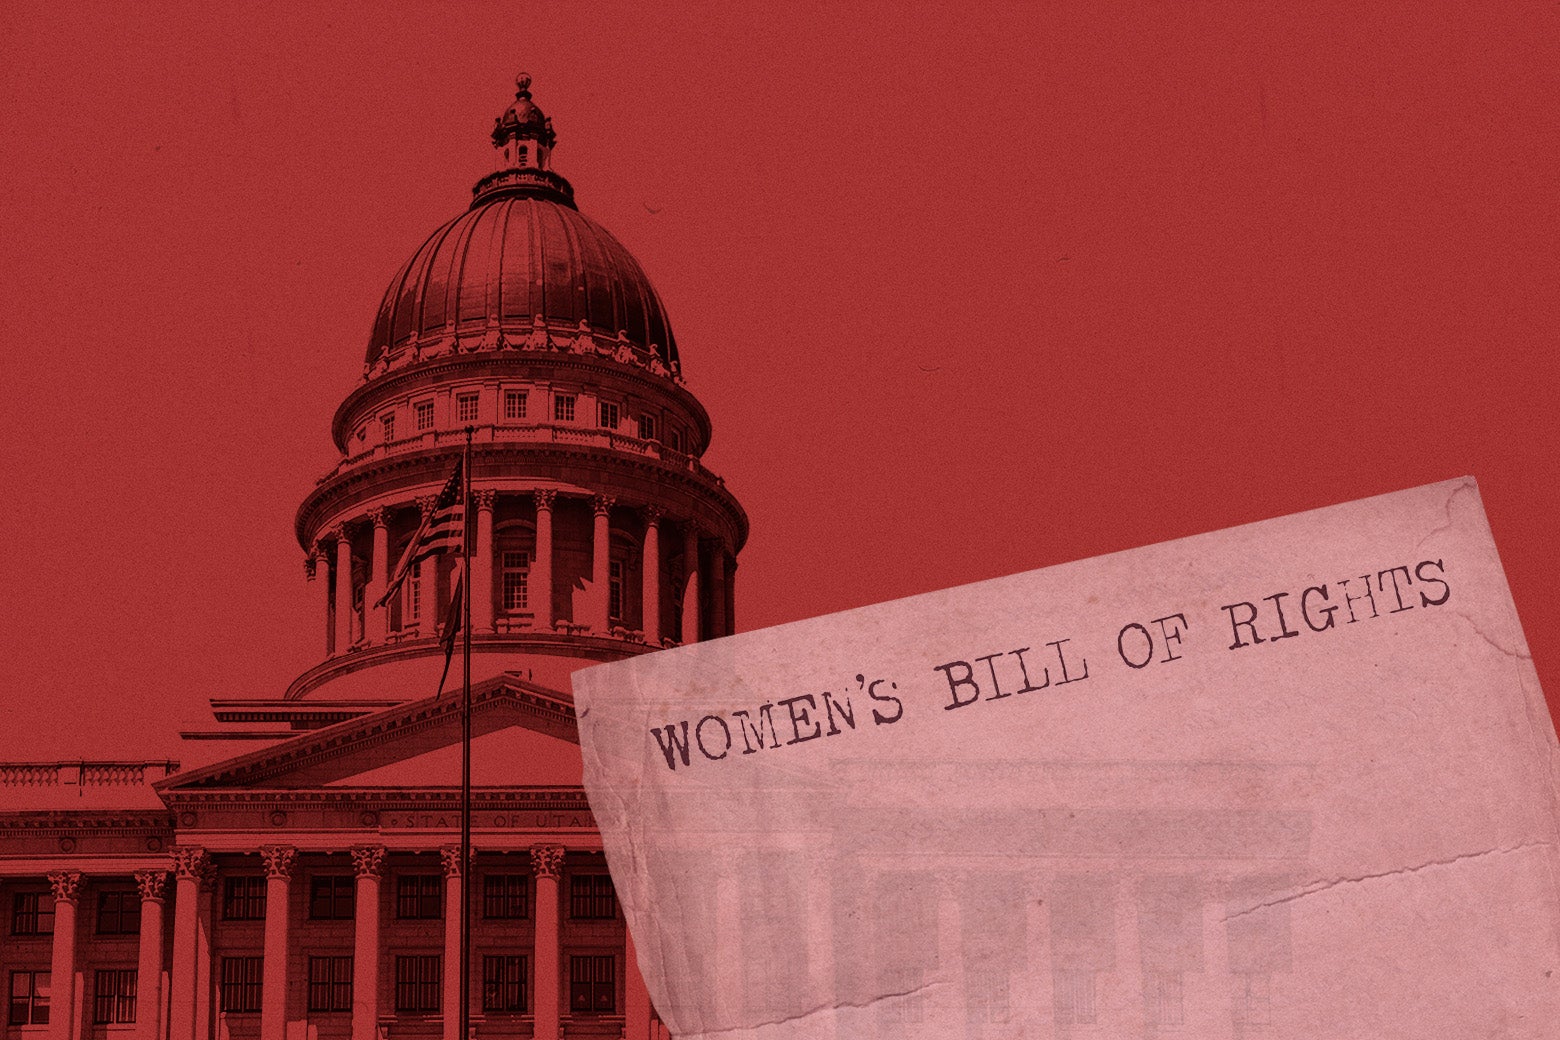 A state capitol building, tinted red, with a "Women's Bill of Rights" document in the foreground.